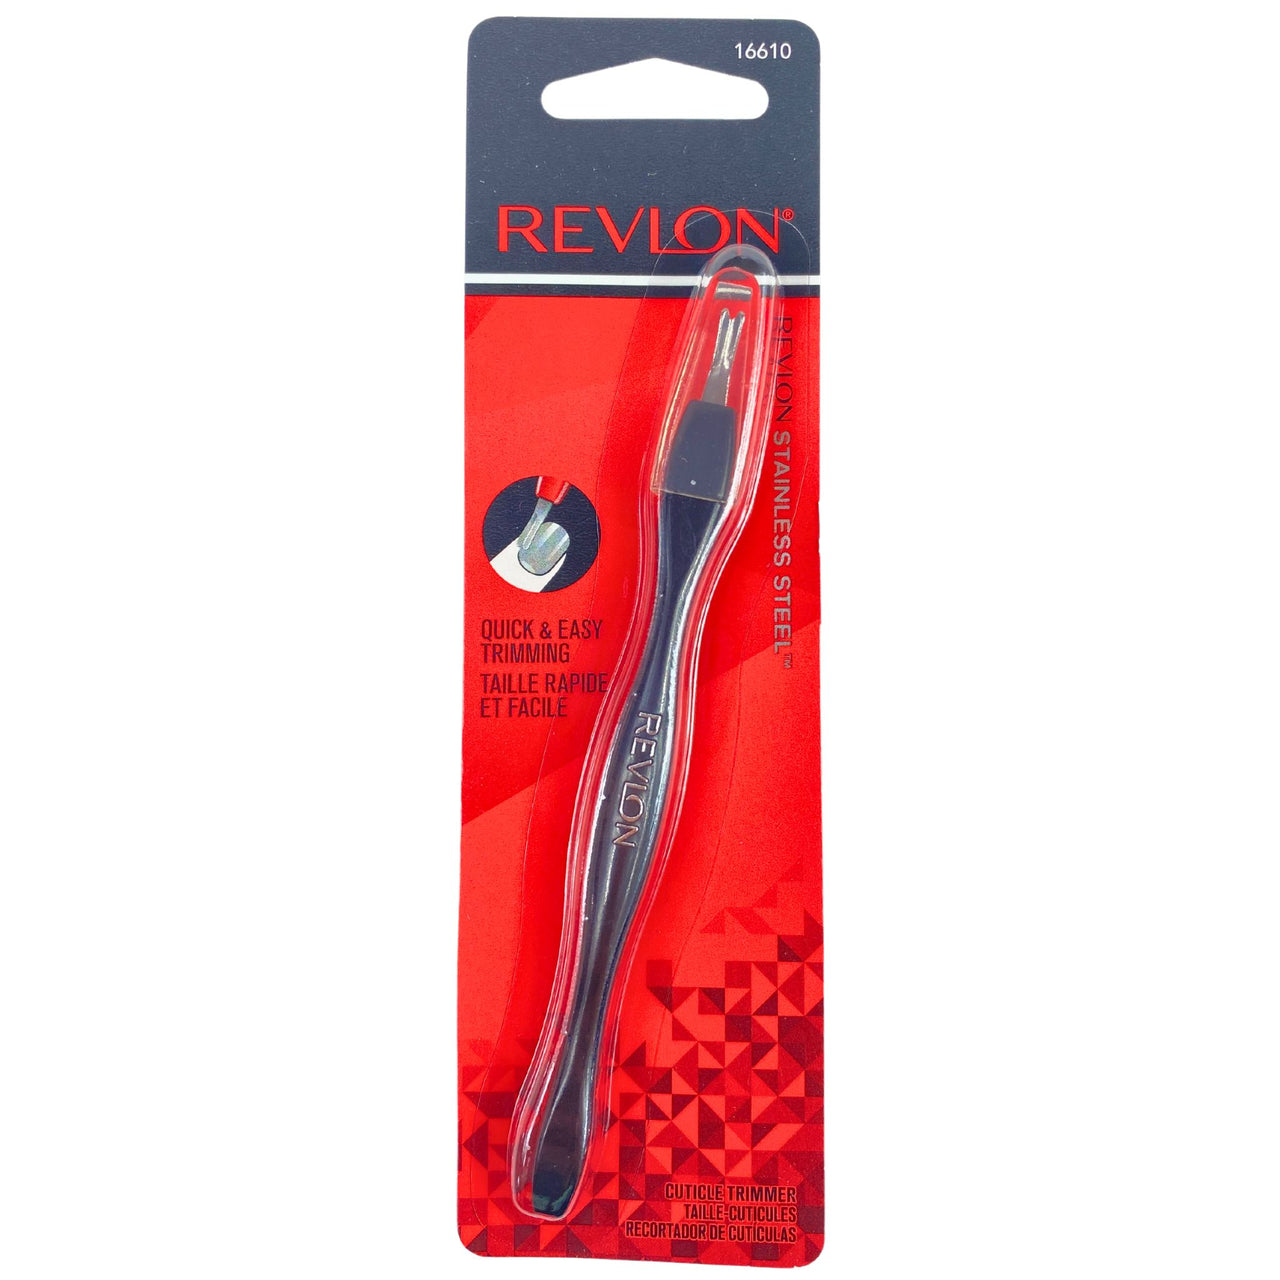 Revlon Stainless Steel Cuticle Trimmer 